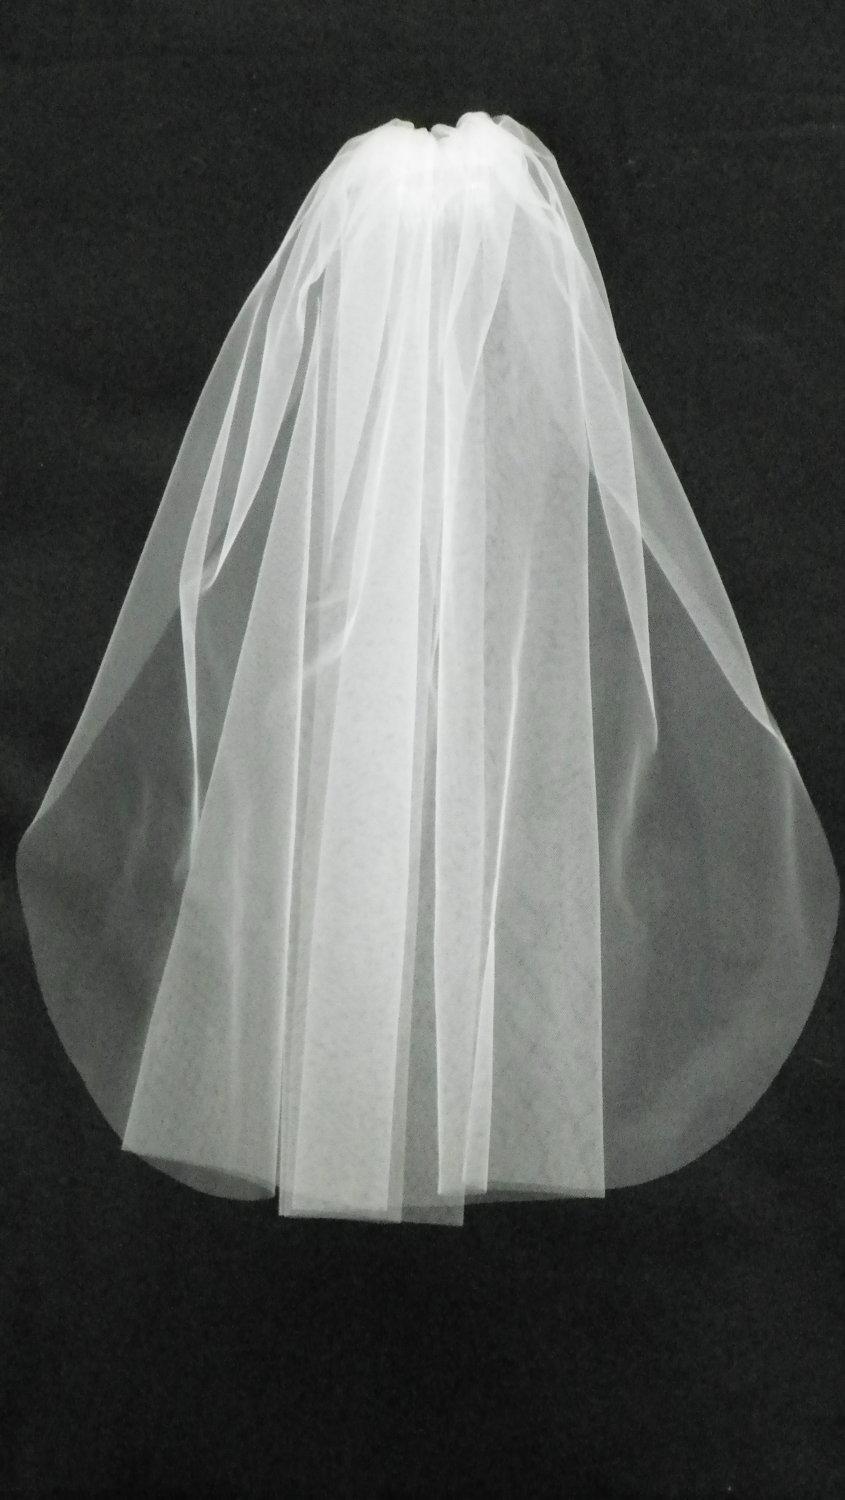 Wedding - Communion Veil Baptism 25 inches long, White, Ivory,Super deal.